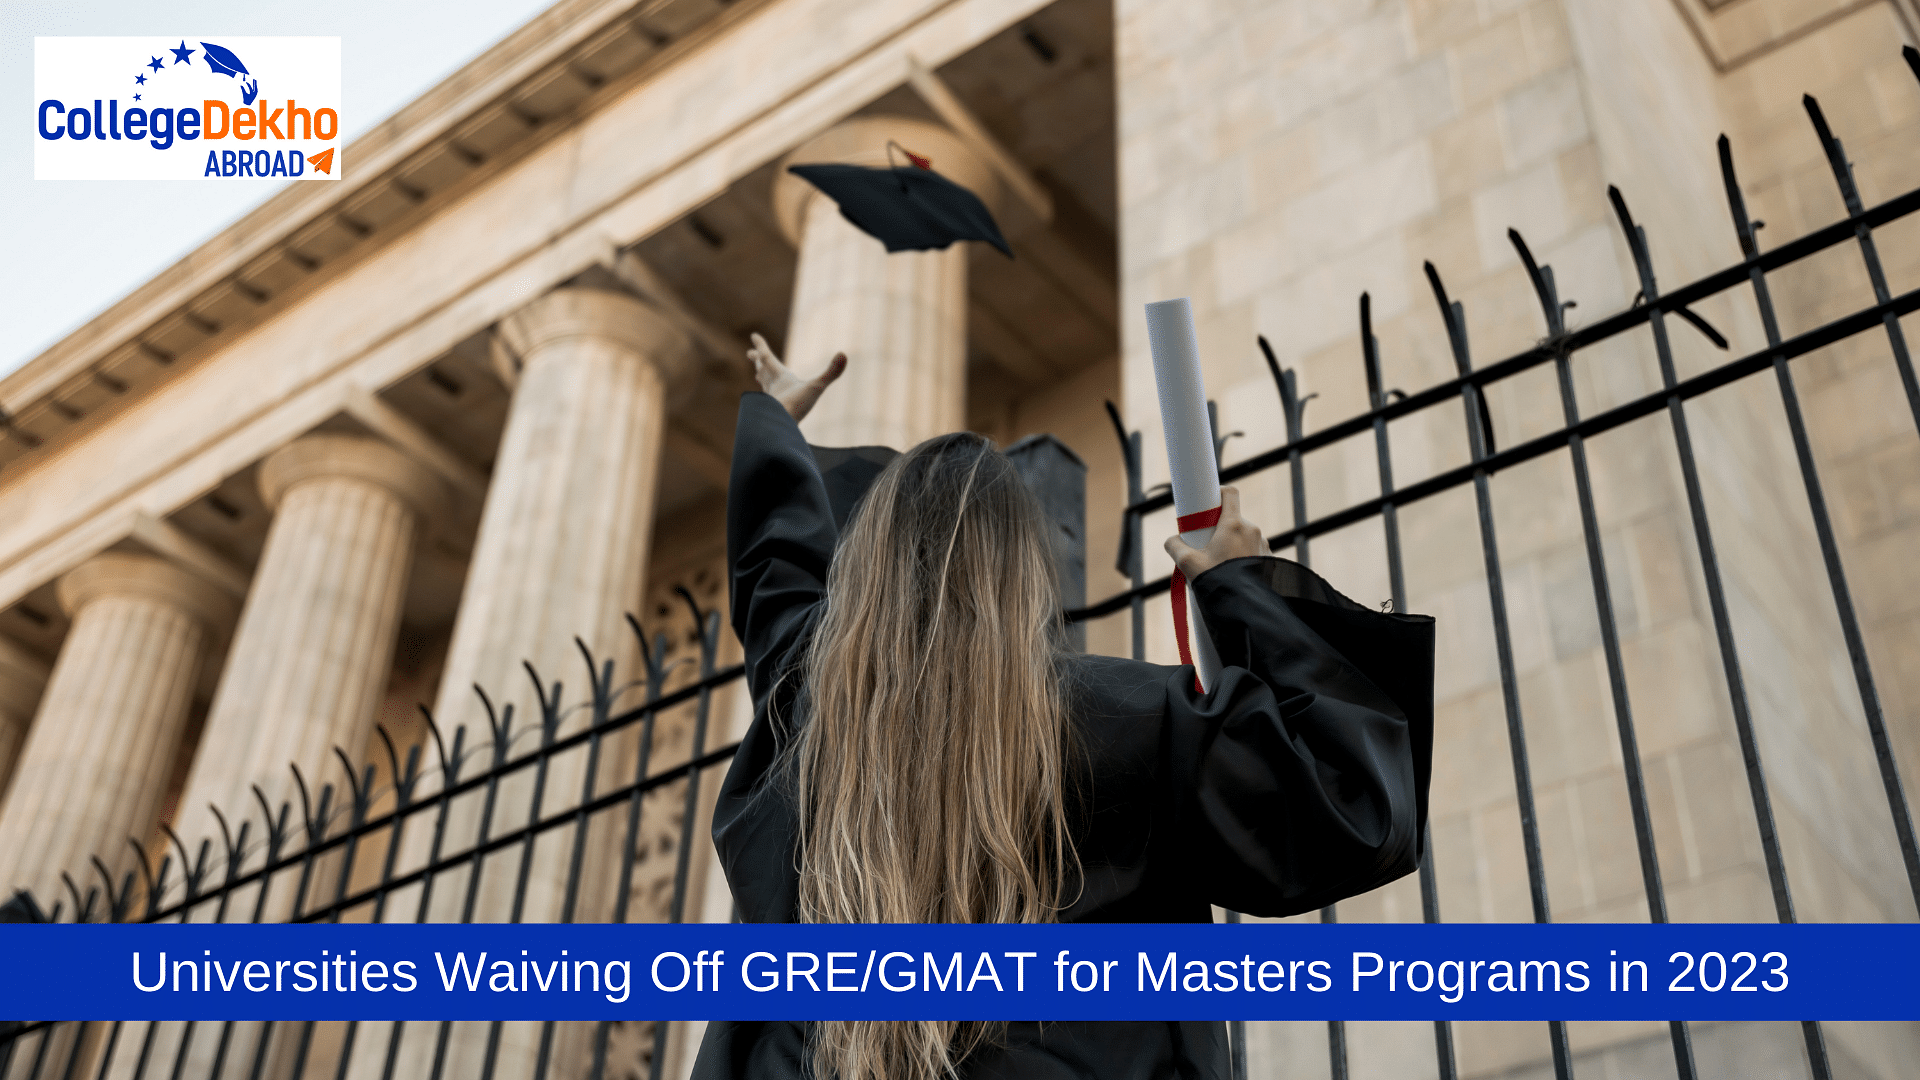 Universities Waiving Off GRE/GMAT for Masters Programs in 2023